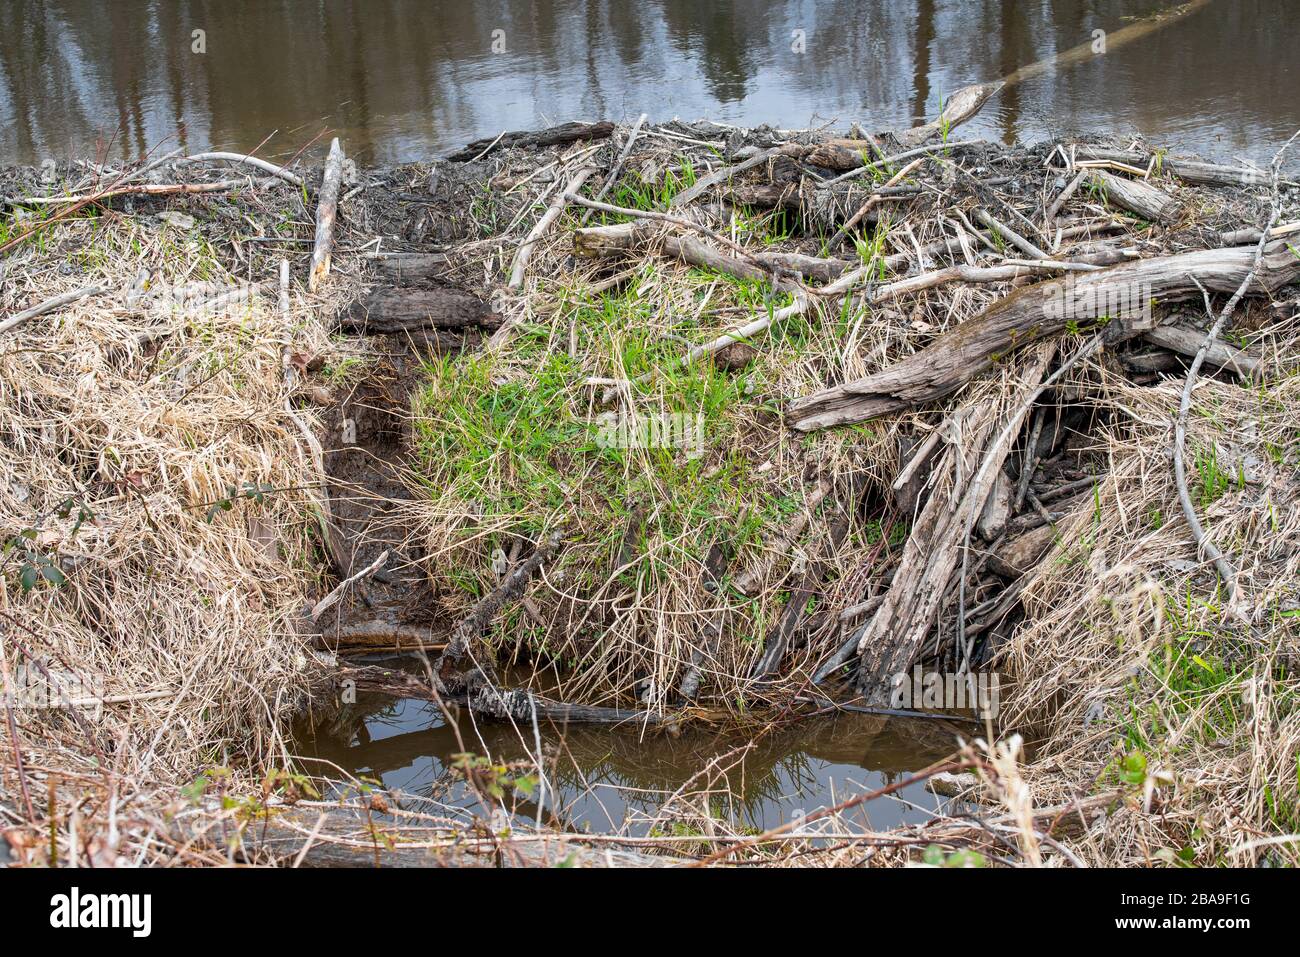 A close up photograph of a beaver's dam near the shore of a river. Stock Photo